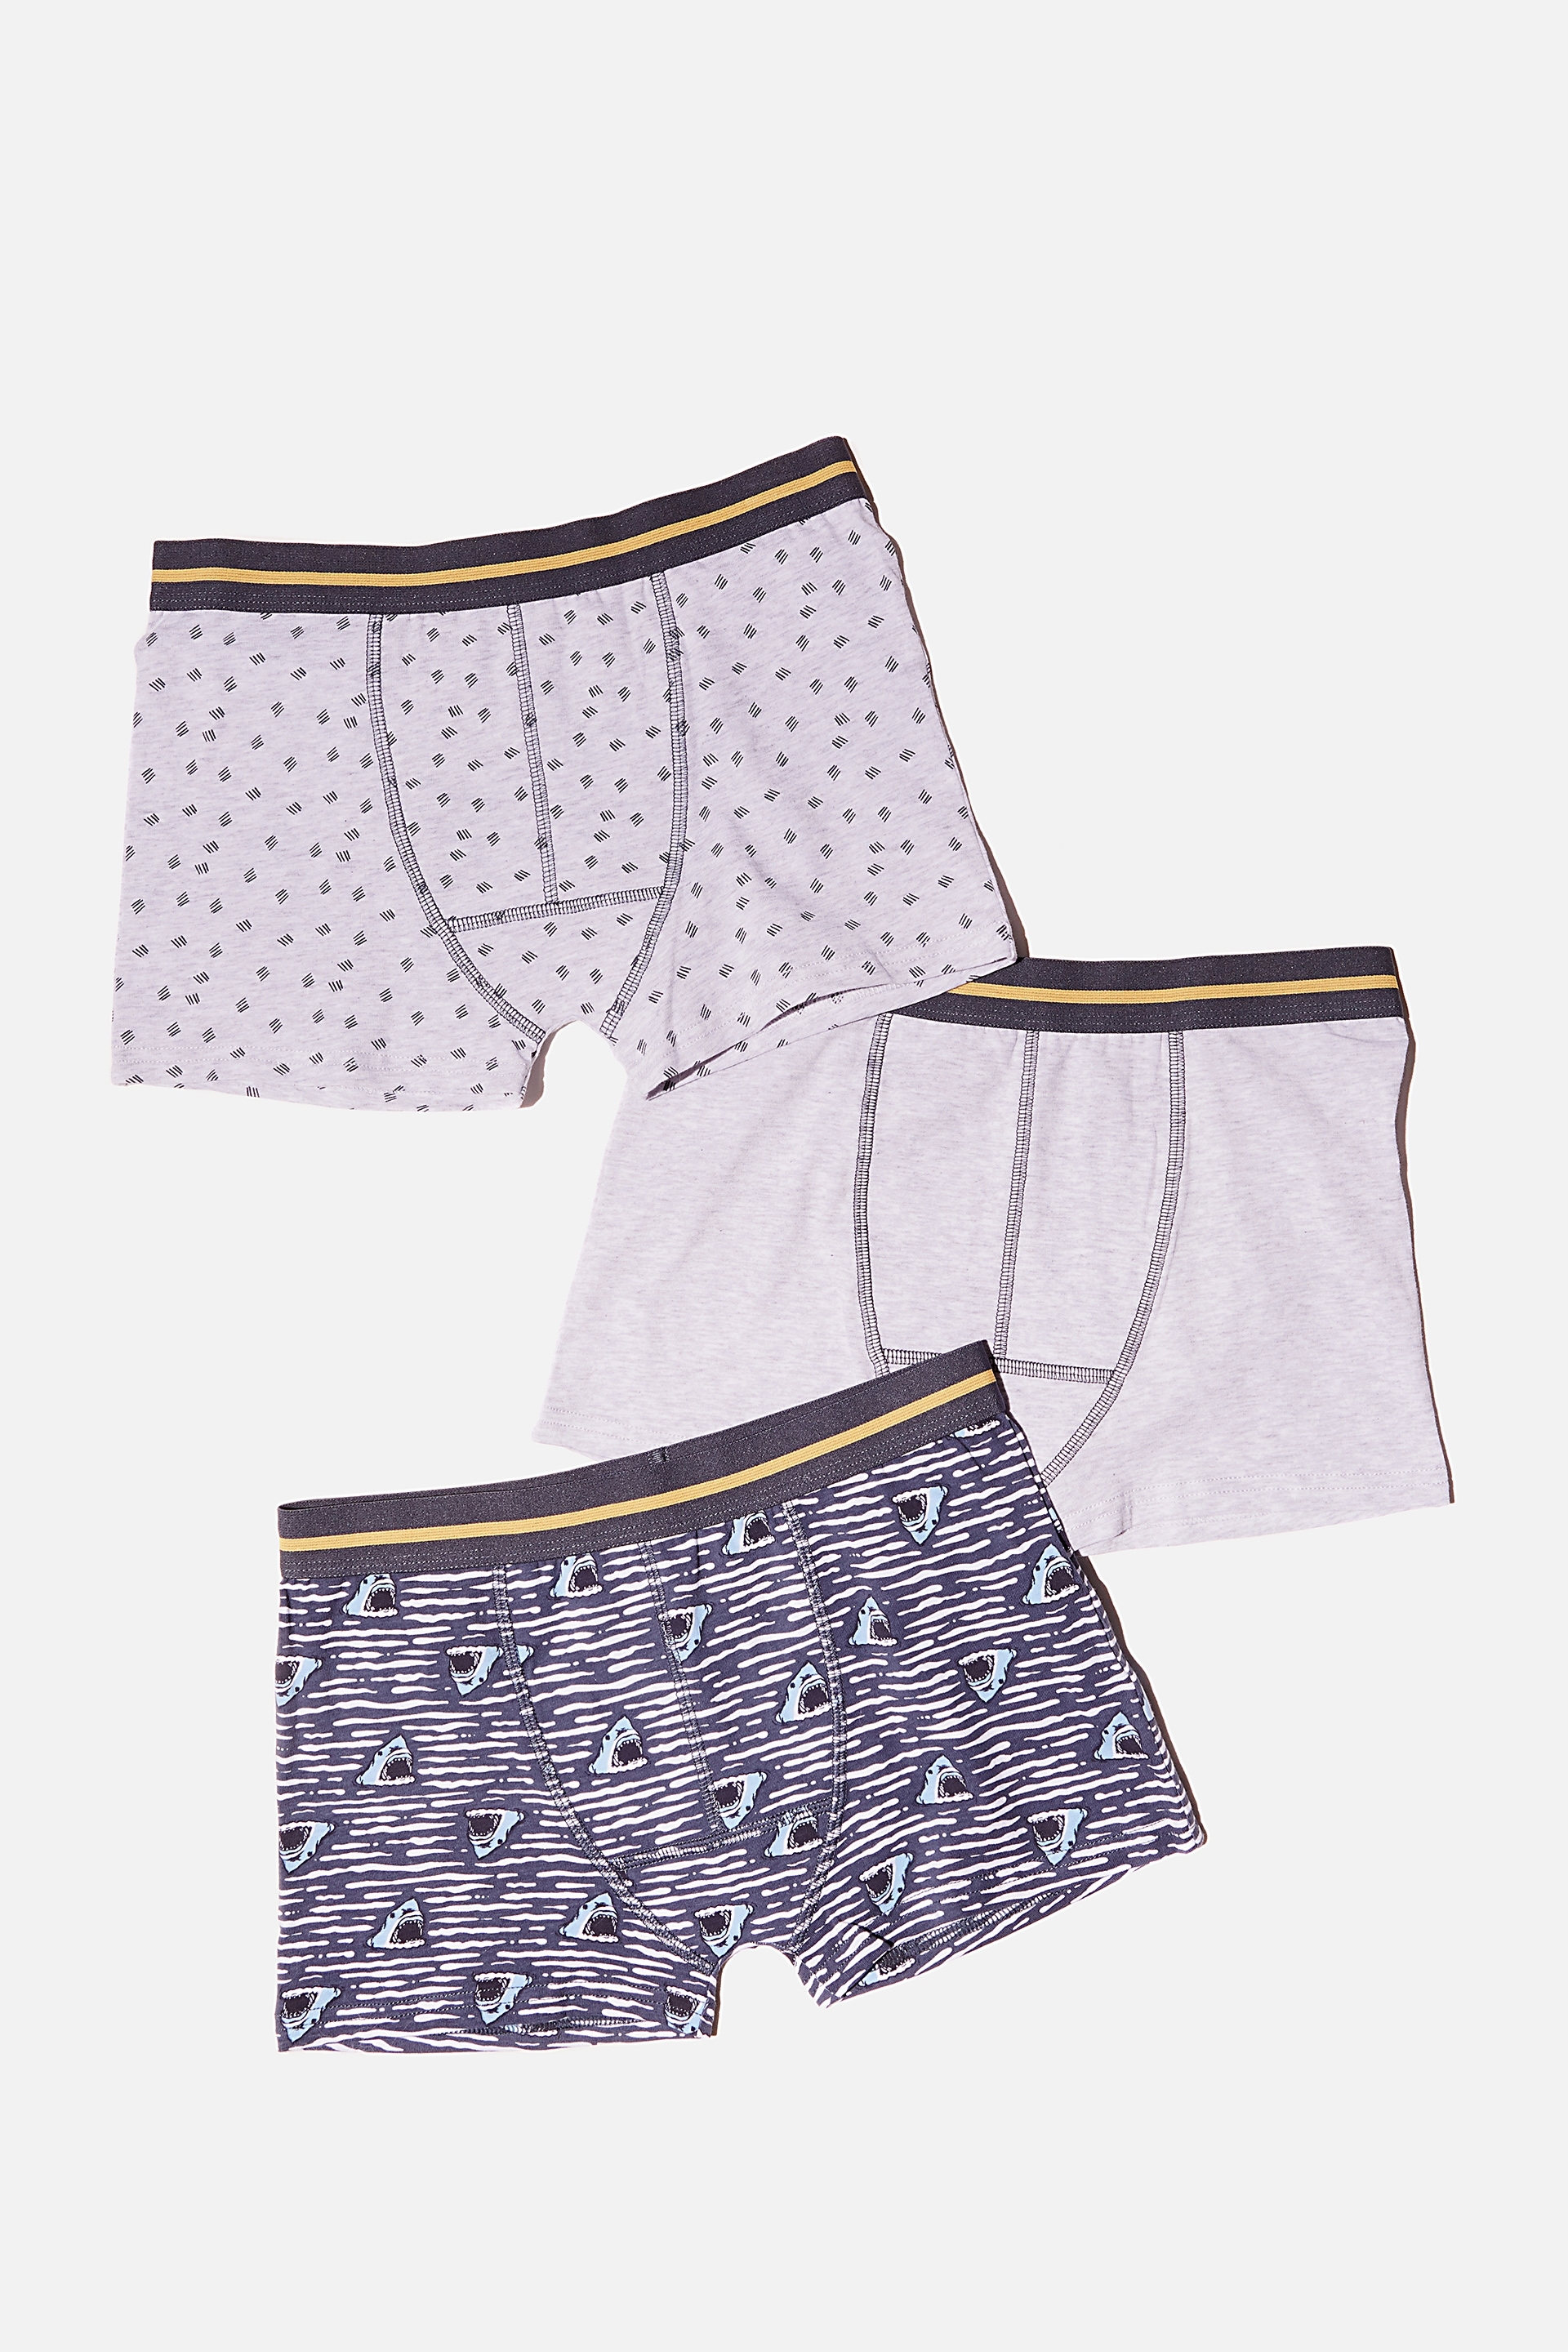 Size 2-13 Surf The Shop 3 Pack Boys Trunks in Black/Multicolour/Football Designs 